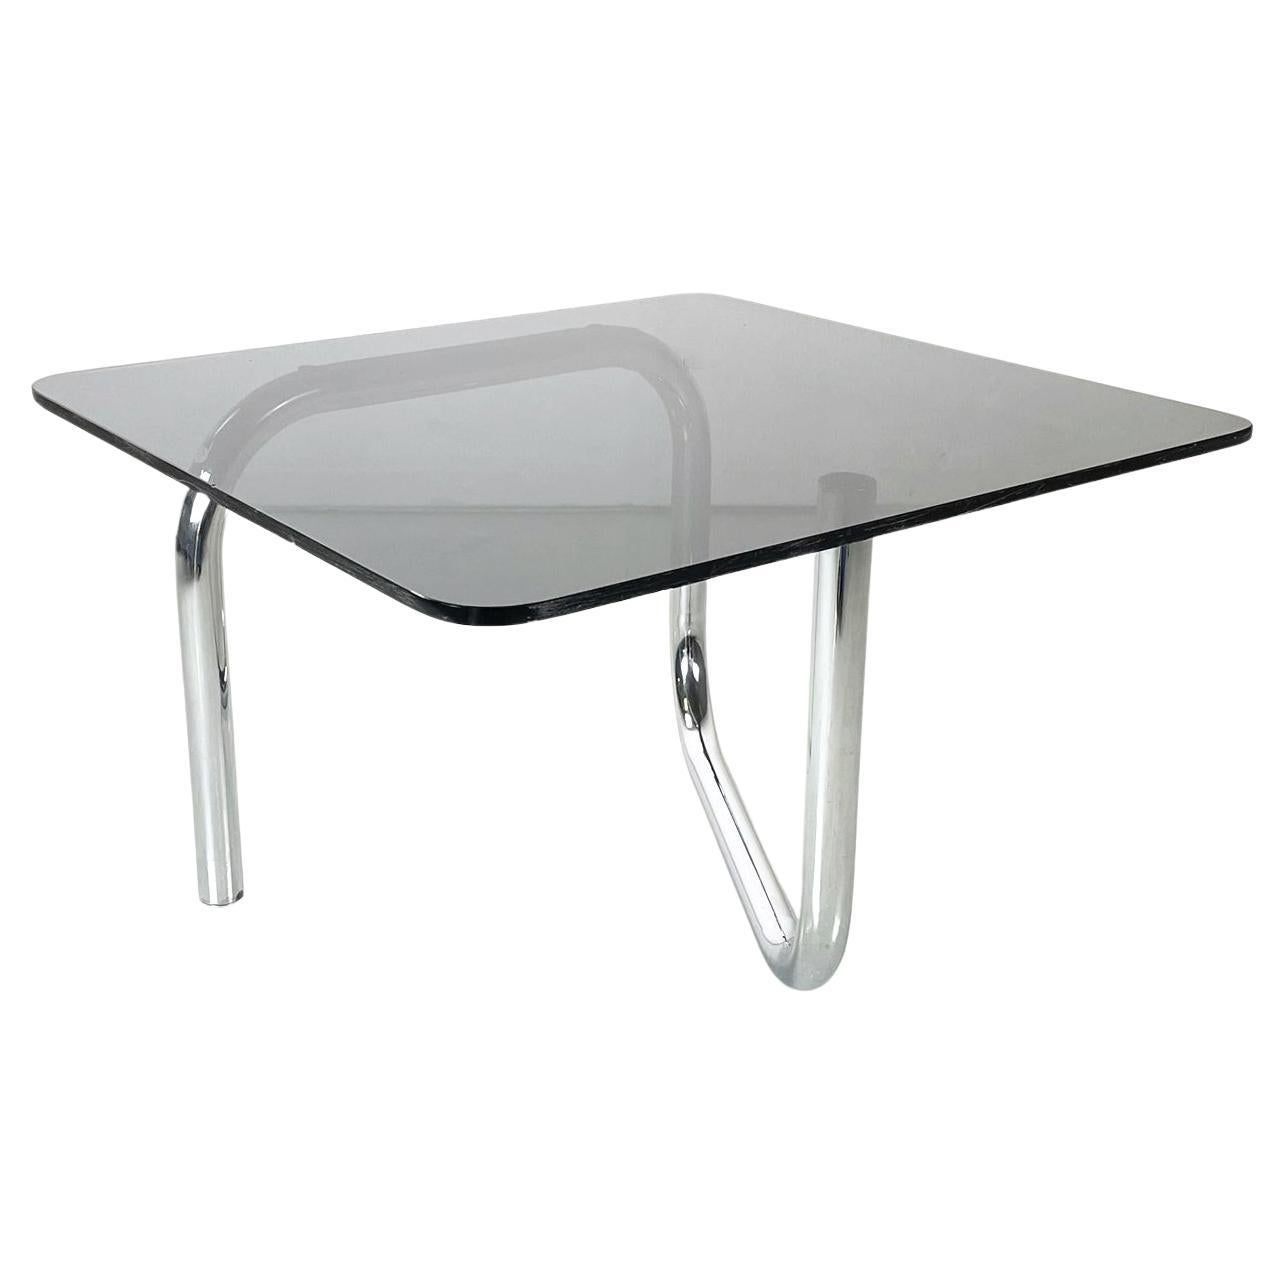 Italian Modern Coffee Table with Rectangular Smoked Glass Chromed Steel, 1970s For Sale